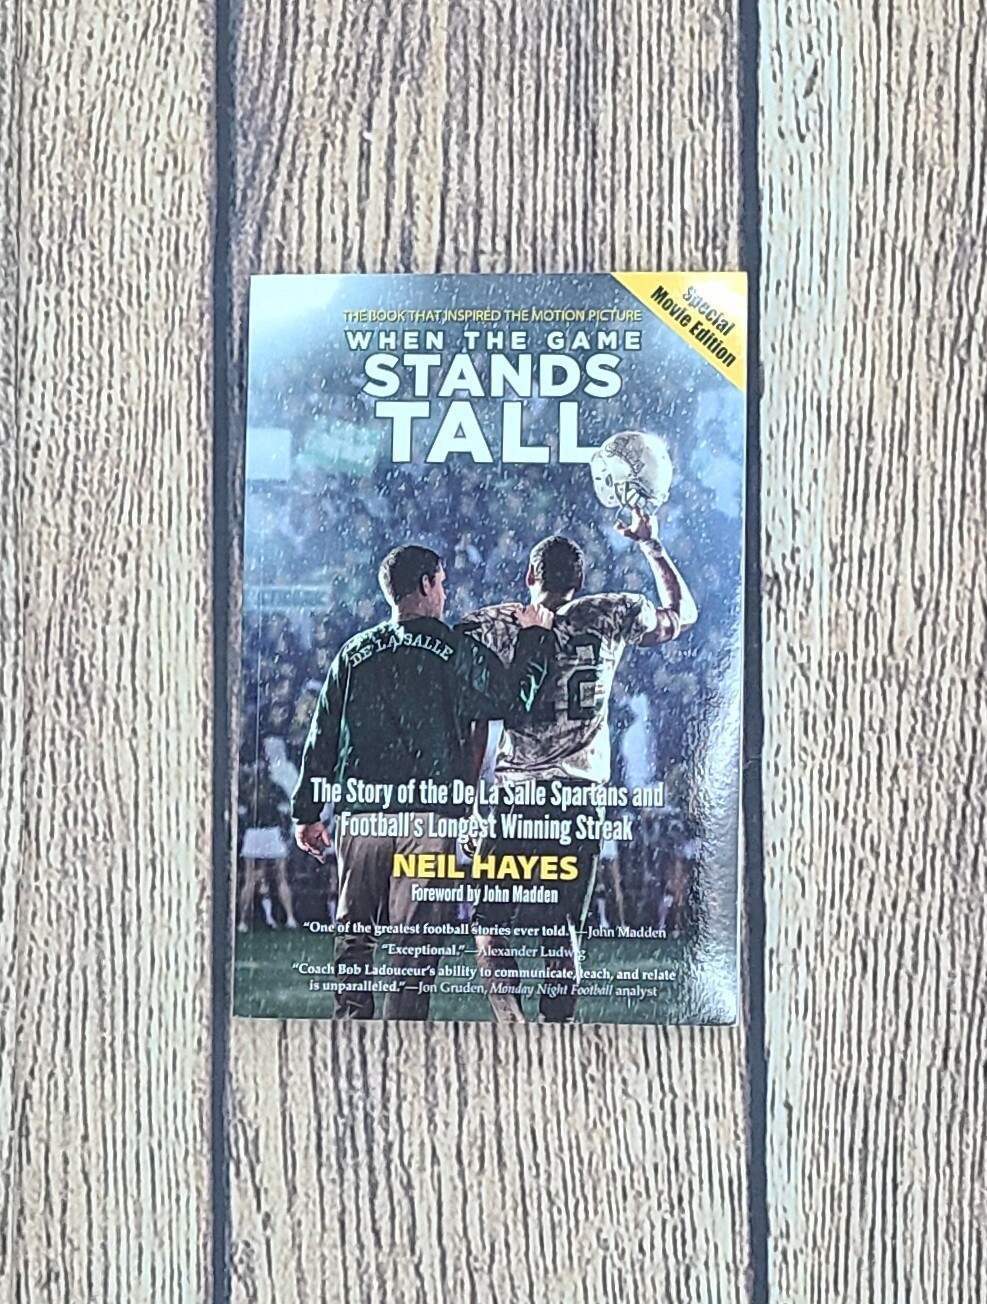 When the Game Stands Tall by Neil Hayes and John Madden